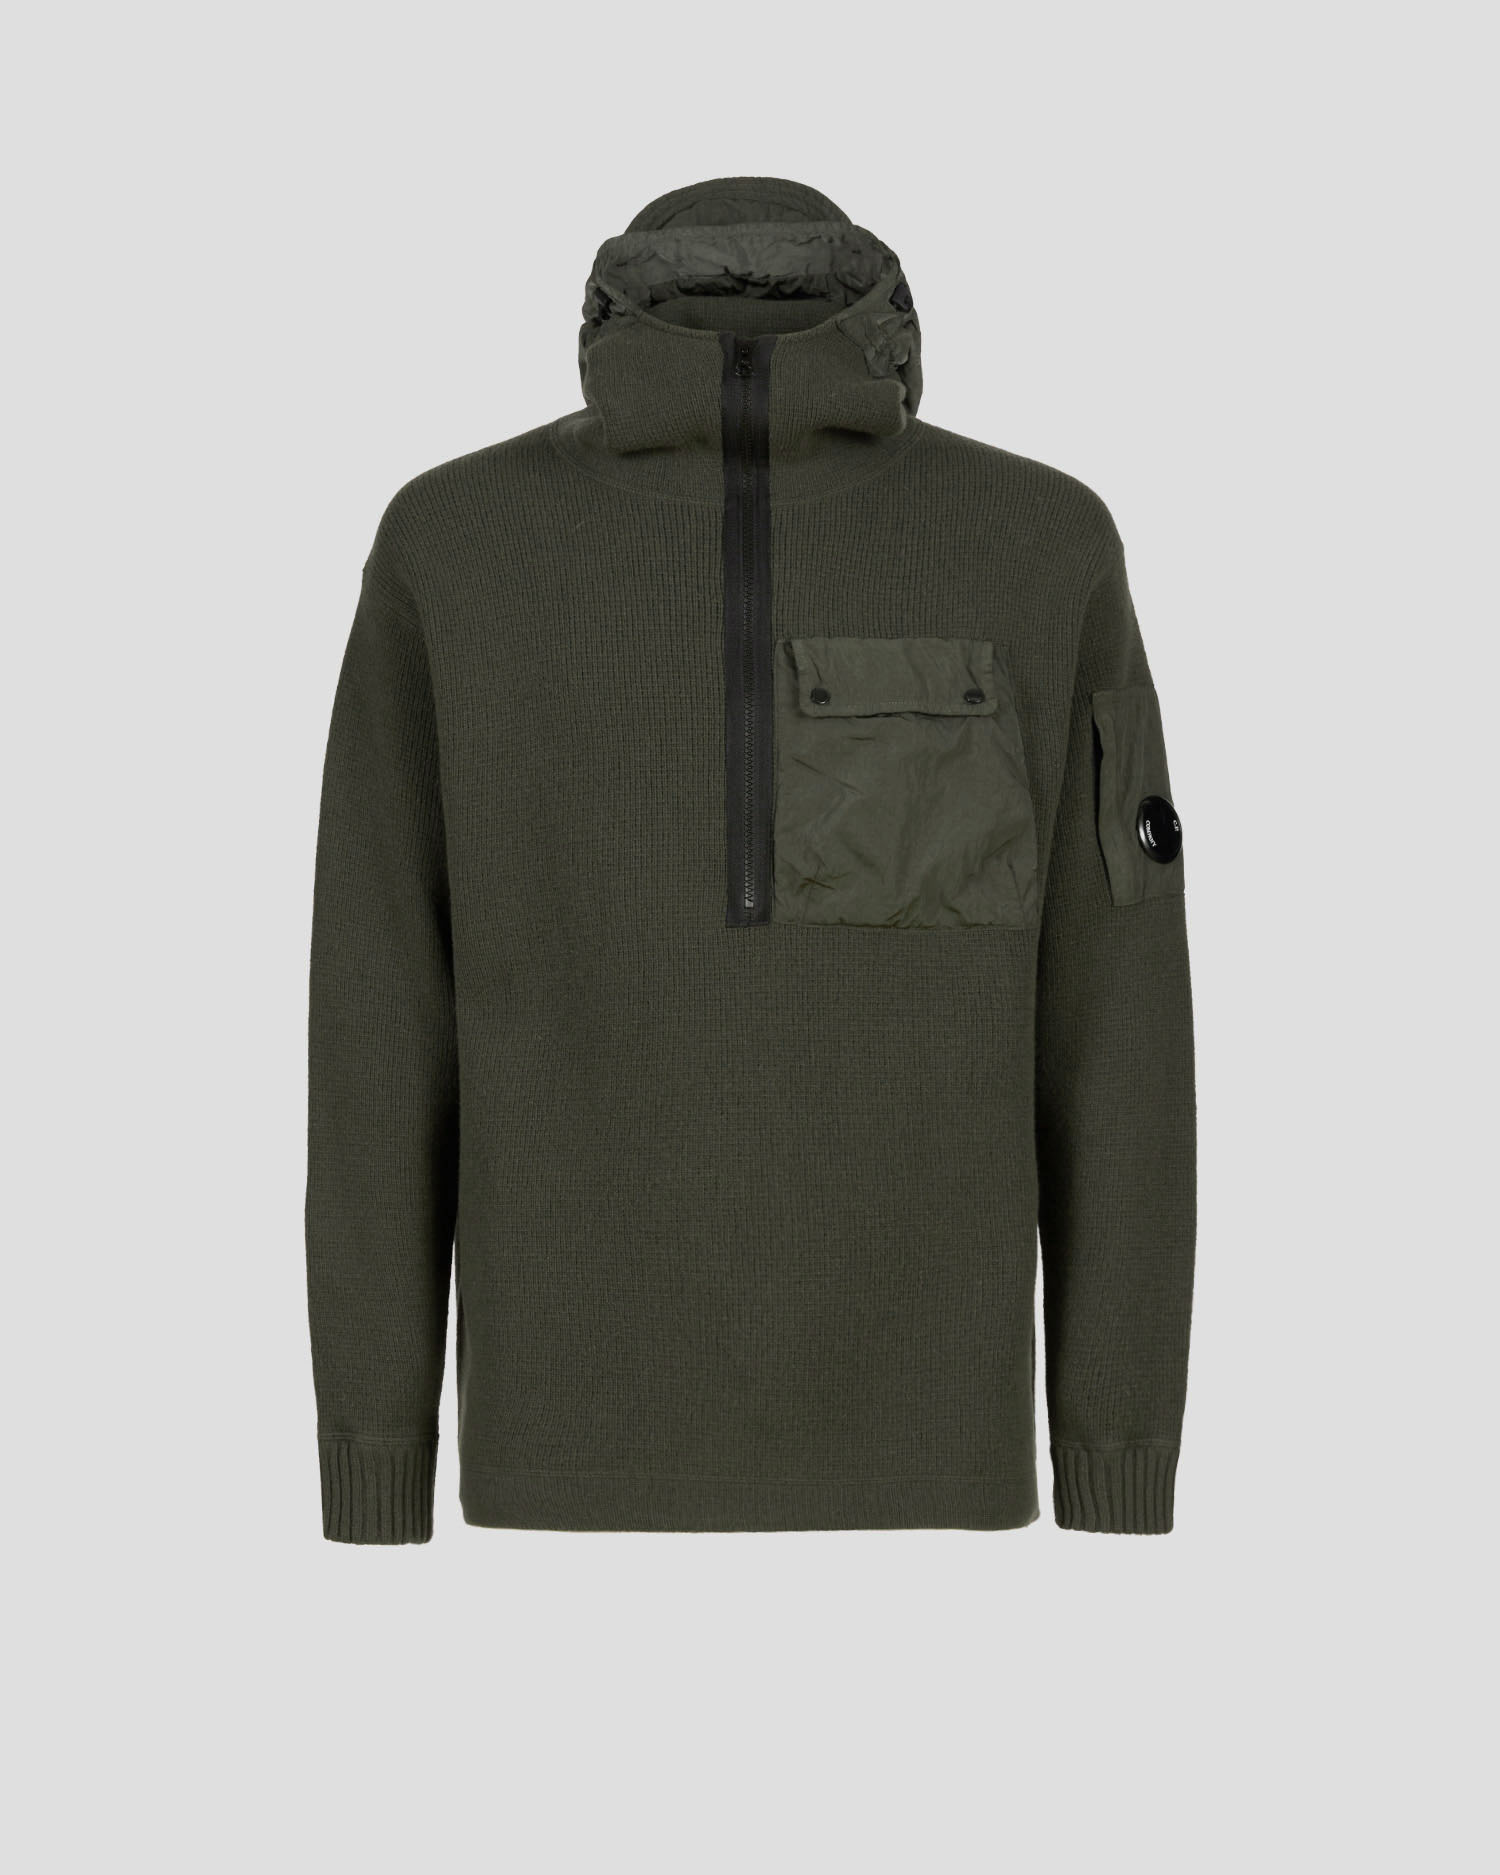 Lambswool Mixed Hooded Knit | C.P. Company Online Store